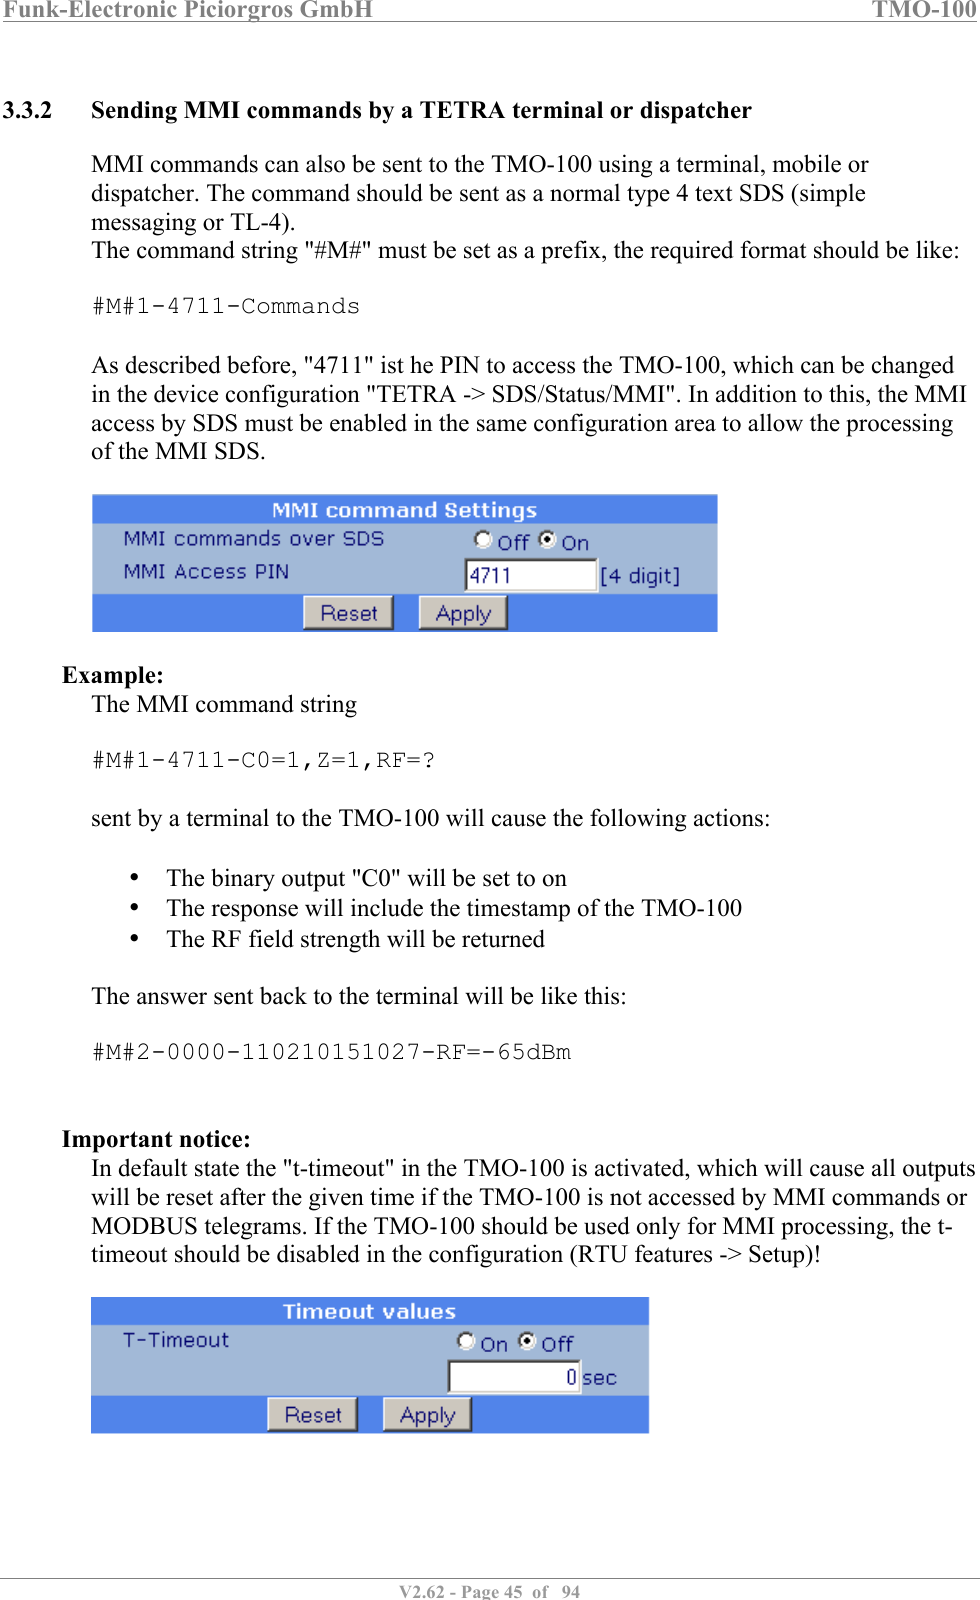 Funk-Electronic Piciorgros GmbH   TMO-100   V2.62 - Page 45  of   94   3.3.2 Sending MMI commands by a TETRA terminal or dispatcher MMI commands can also be sent to the TMO-100 using a terminal, mobile or dispatcher. The command should be sent as a normal type 4 text SDS (simple messaging or TL-4). The command string &quot;#M#&quot; must be set as a prefix, the required format should be like:  #M#1-4711-Commands  As described before, &quot;4711&quot; ist he PIN to access the TMO-100, which can be changed in the device configuration &quot;TETRA -&gt; SDS/Status/MMI&quot;. In addition to this, the MMI access by SDS must be enabled in the same configuration area to allow the processing of the MMI SDS.    Example: The MMI command string  #M#1-4711-C0=1,Z=1,RF=?  sent by a terminal to the TMO-100 will cause the following actions:   • The binary output &quot;C0&quot; will be set to on • The response will include the timestamp of the TMO-100 • The RF field strength will be returned  The answer sent back to the terminal will be like this:  #M#2-0000-110210151027-RF=-65dBm   Important notice: In default state the &quot;t-timeout&quot; in the TMO-100 is activated, which will cause all outputs will be reset after the given time if the TMO-100 is not accessed by MMI commands or MODBUS telegrams. If the TMO-100 should be used only for MMI processing, the t-timeout should be disabled in the configuration (RTU features -&gt; Setup)!   